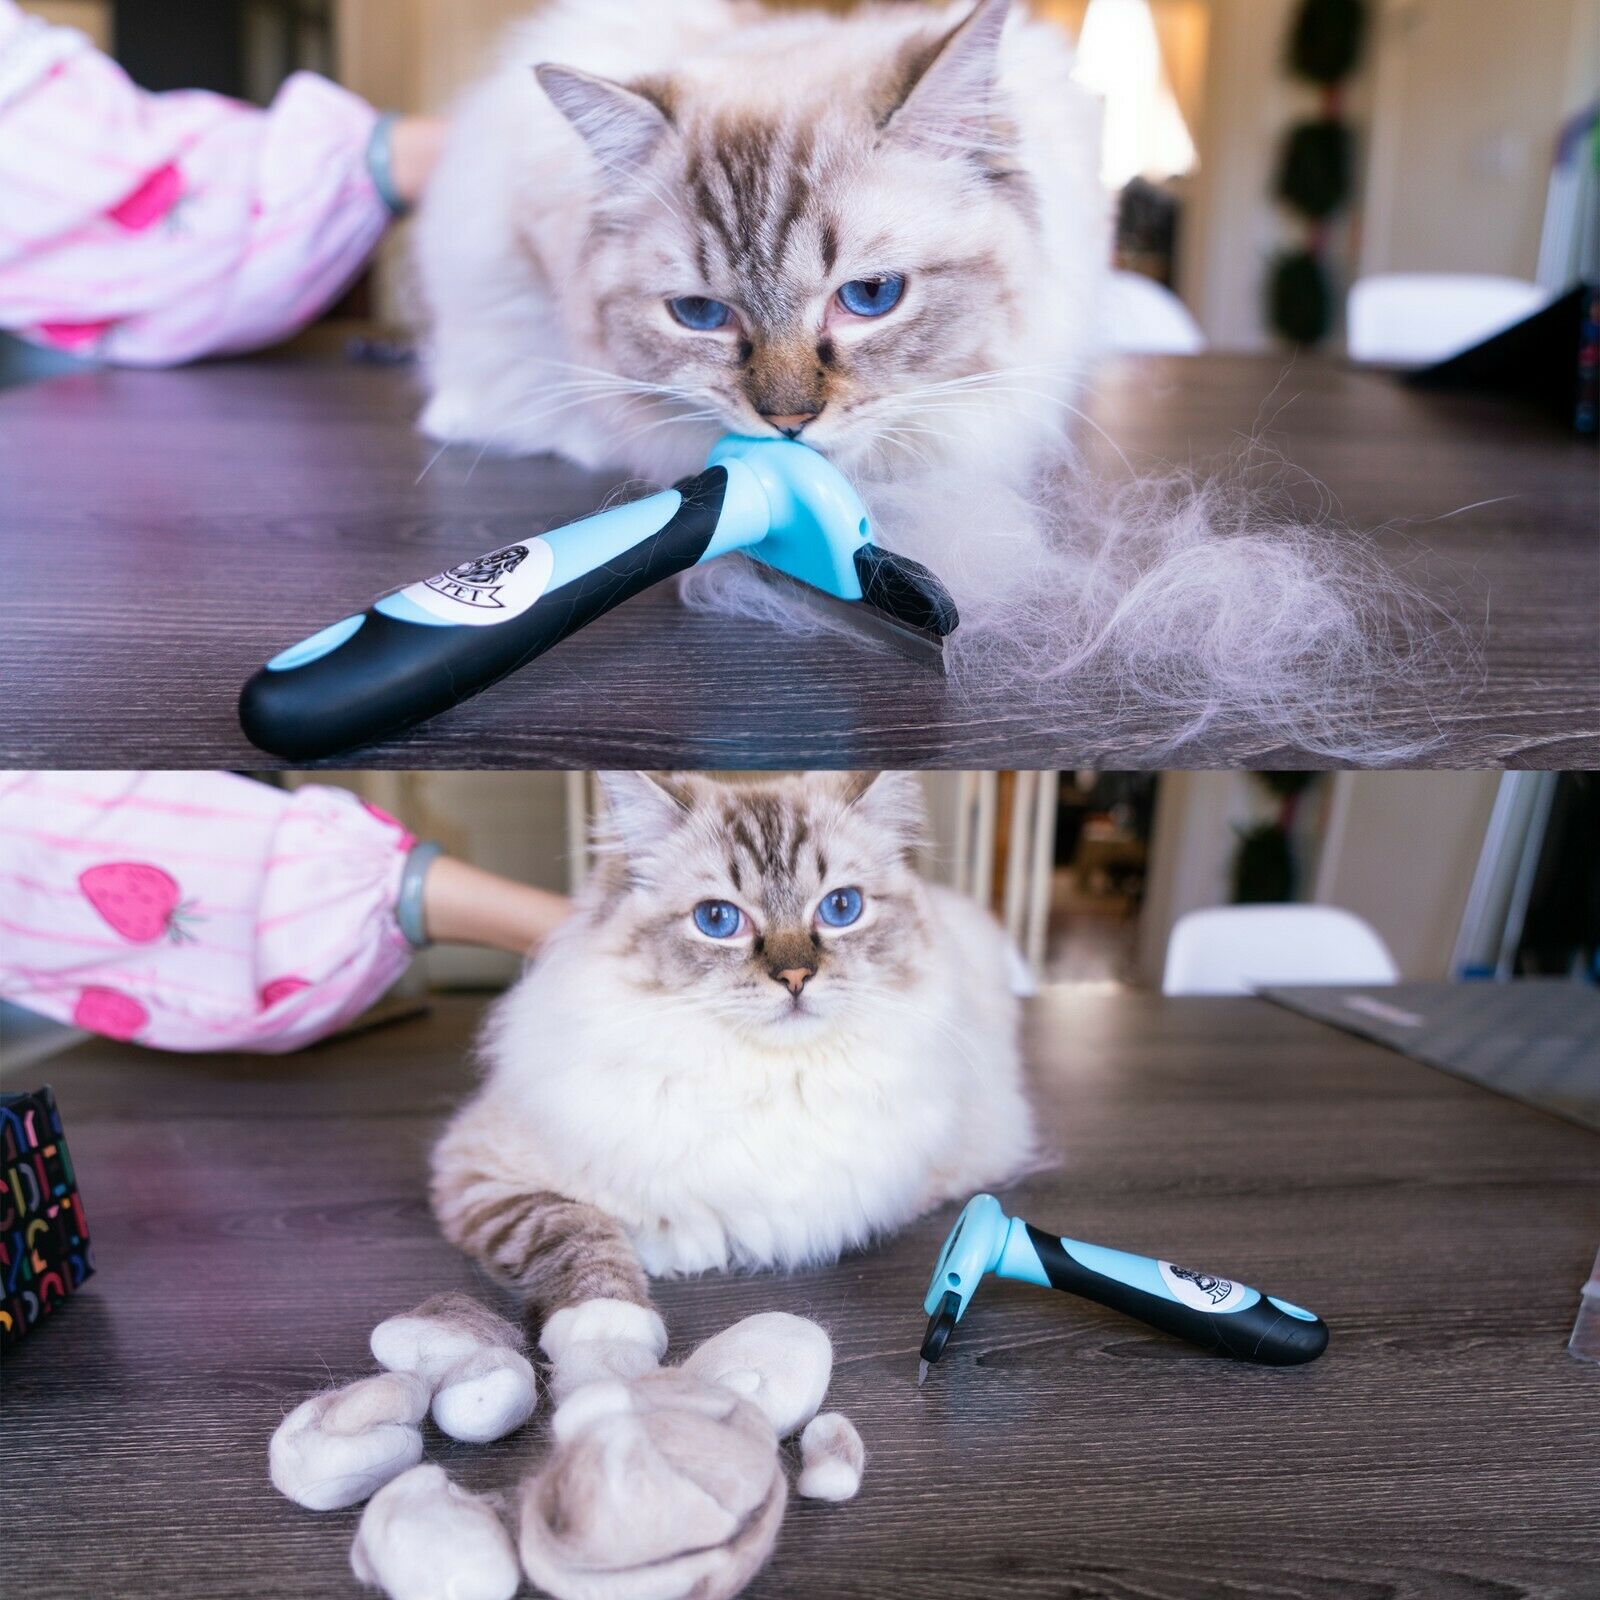 Cat Grooming Trimmer